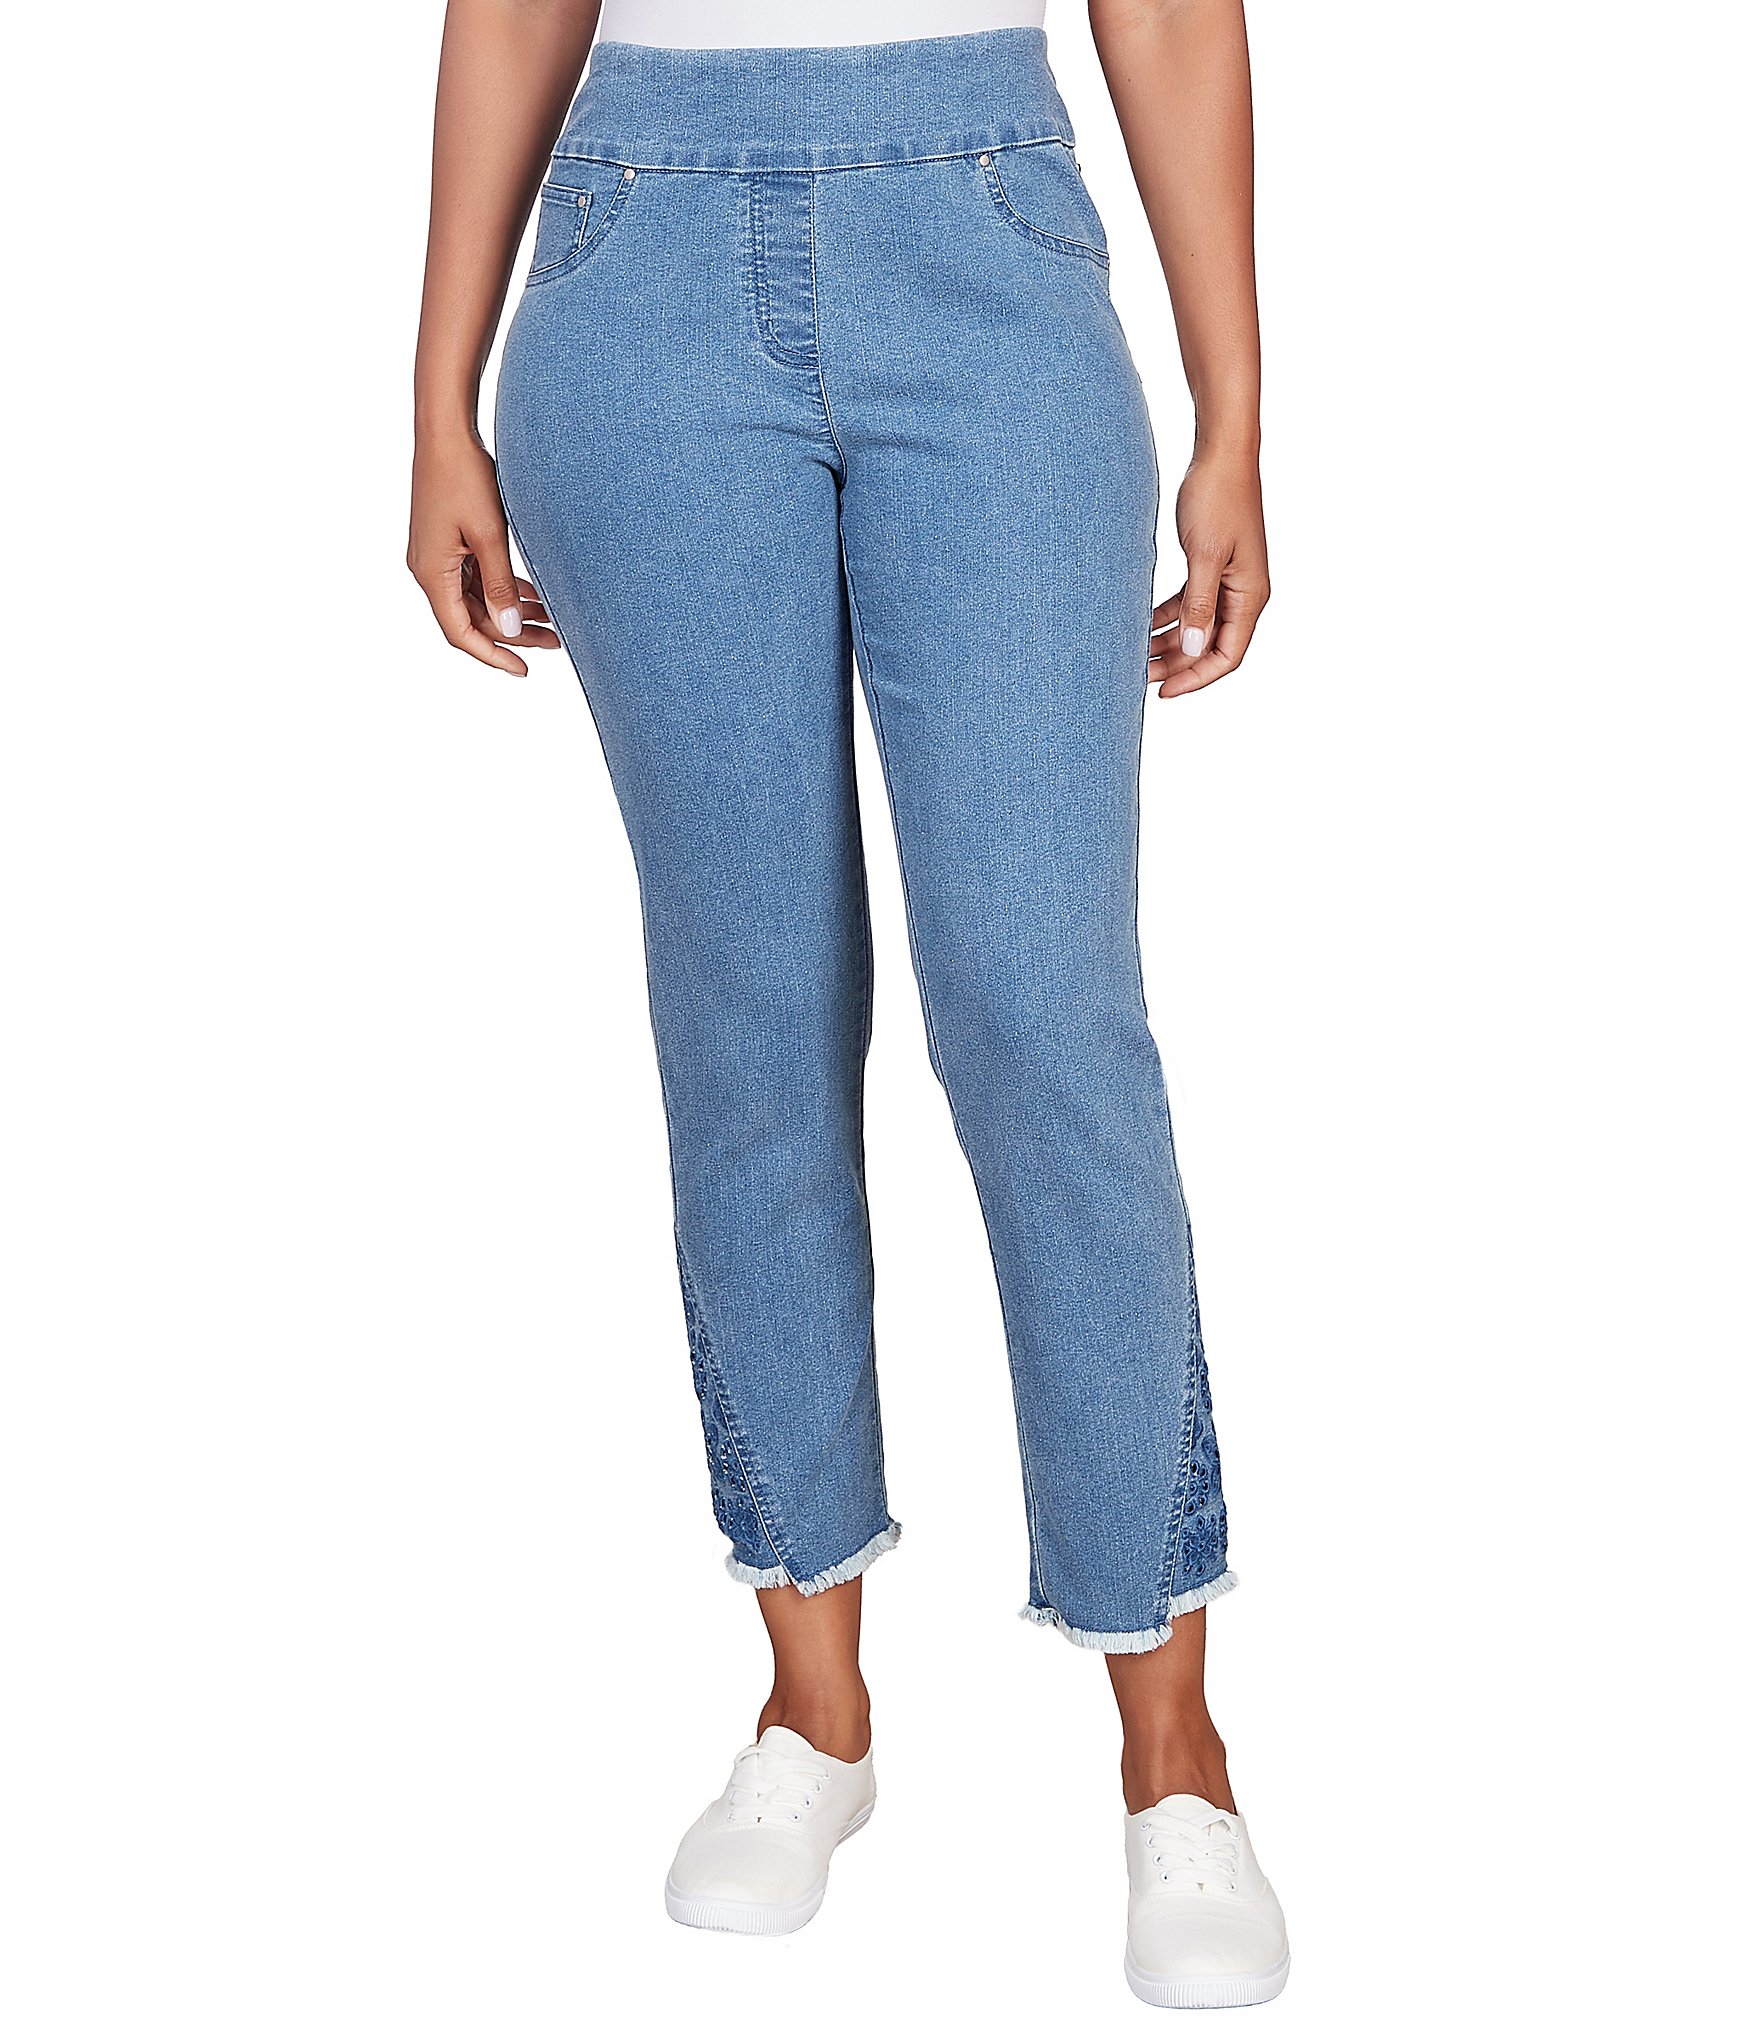 GWAABD Elastic Waist Jeans for Women Women Solid Harlan Pants Jeans Elastic  High Waist Pants Drooping Straight Women's Jeans Retro Cropped Trousers  Demin Pants Trousers with Pocket 